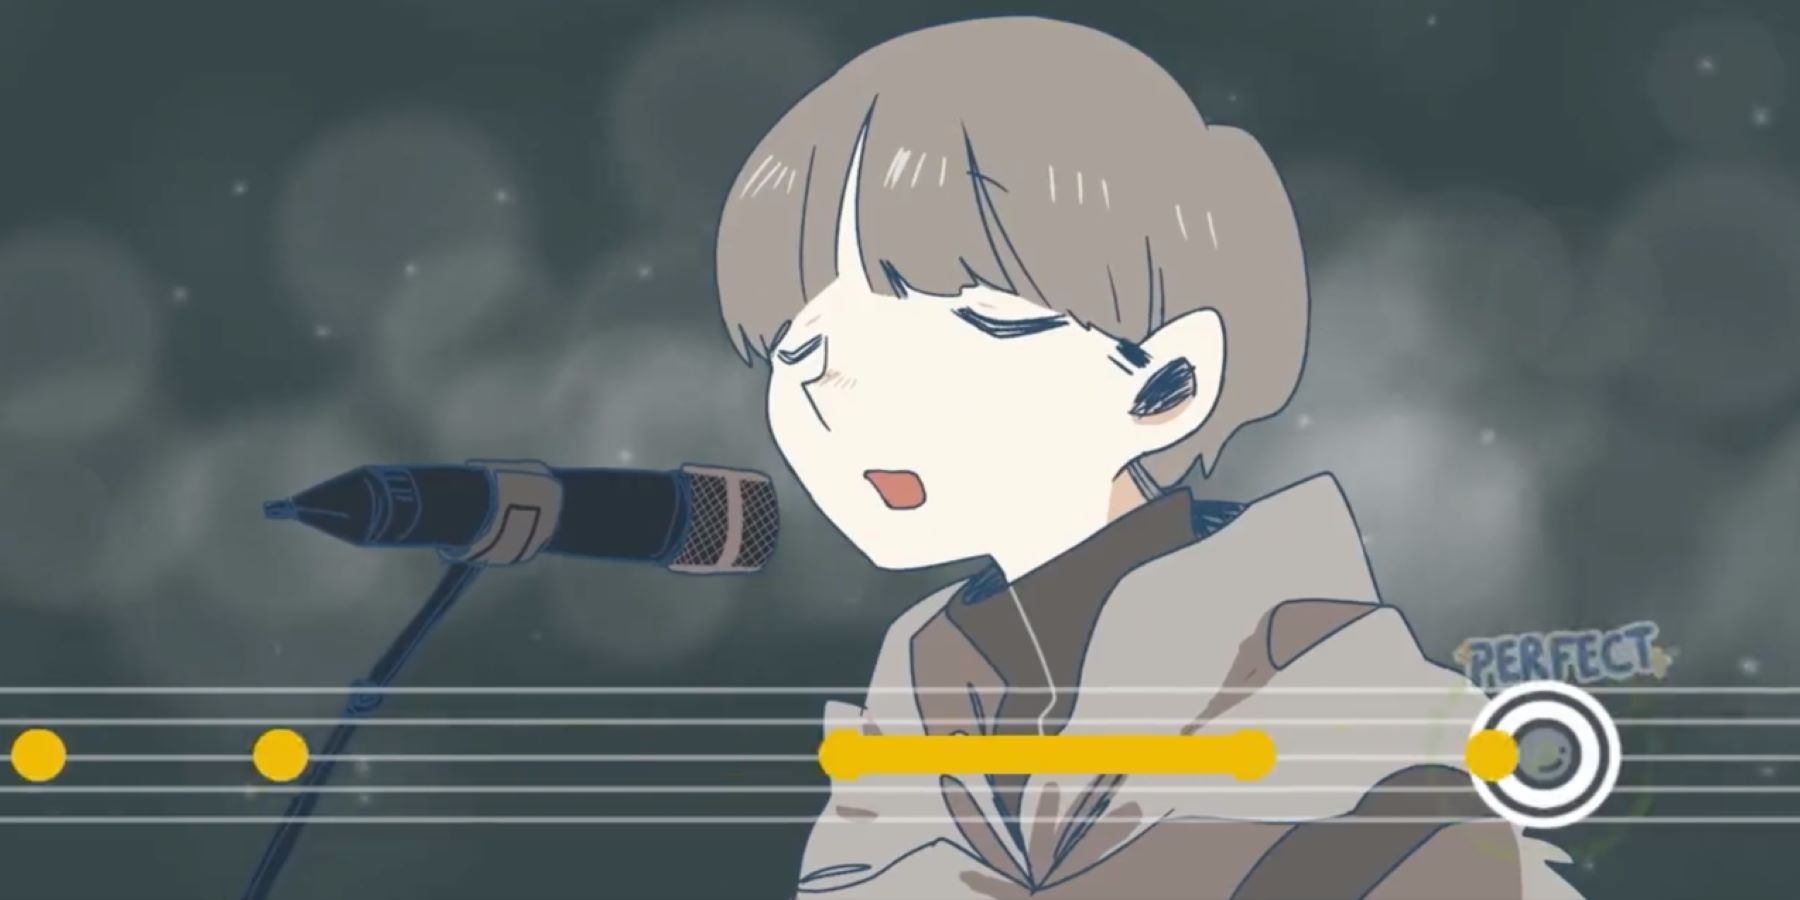 Rama singing into a microphone during a rhythm game section of Afterlove EP